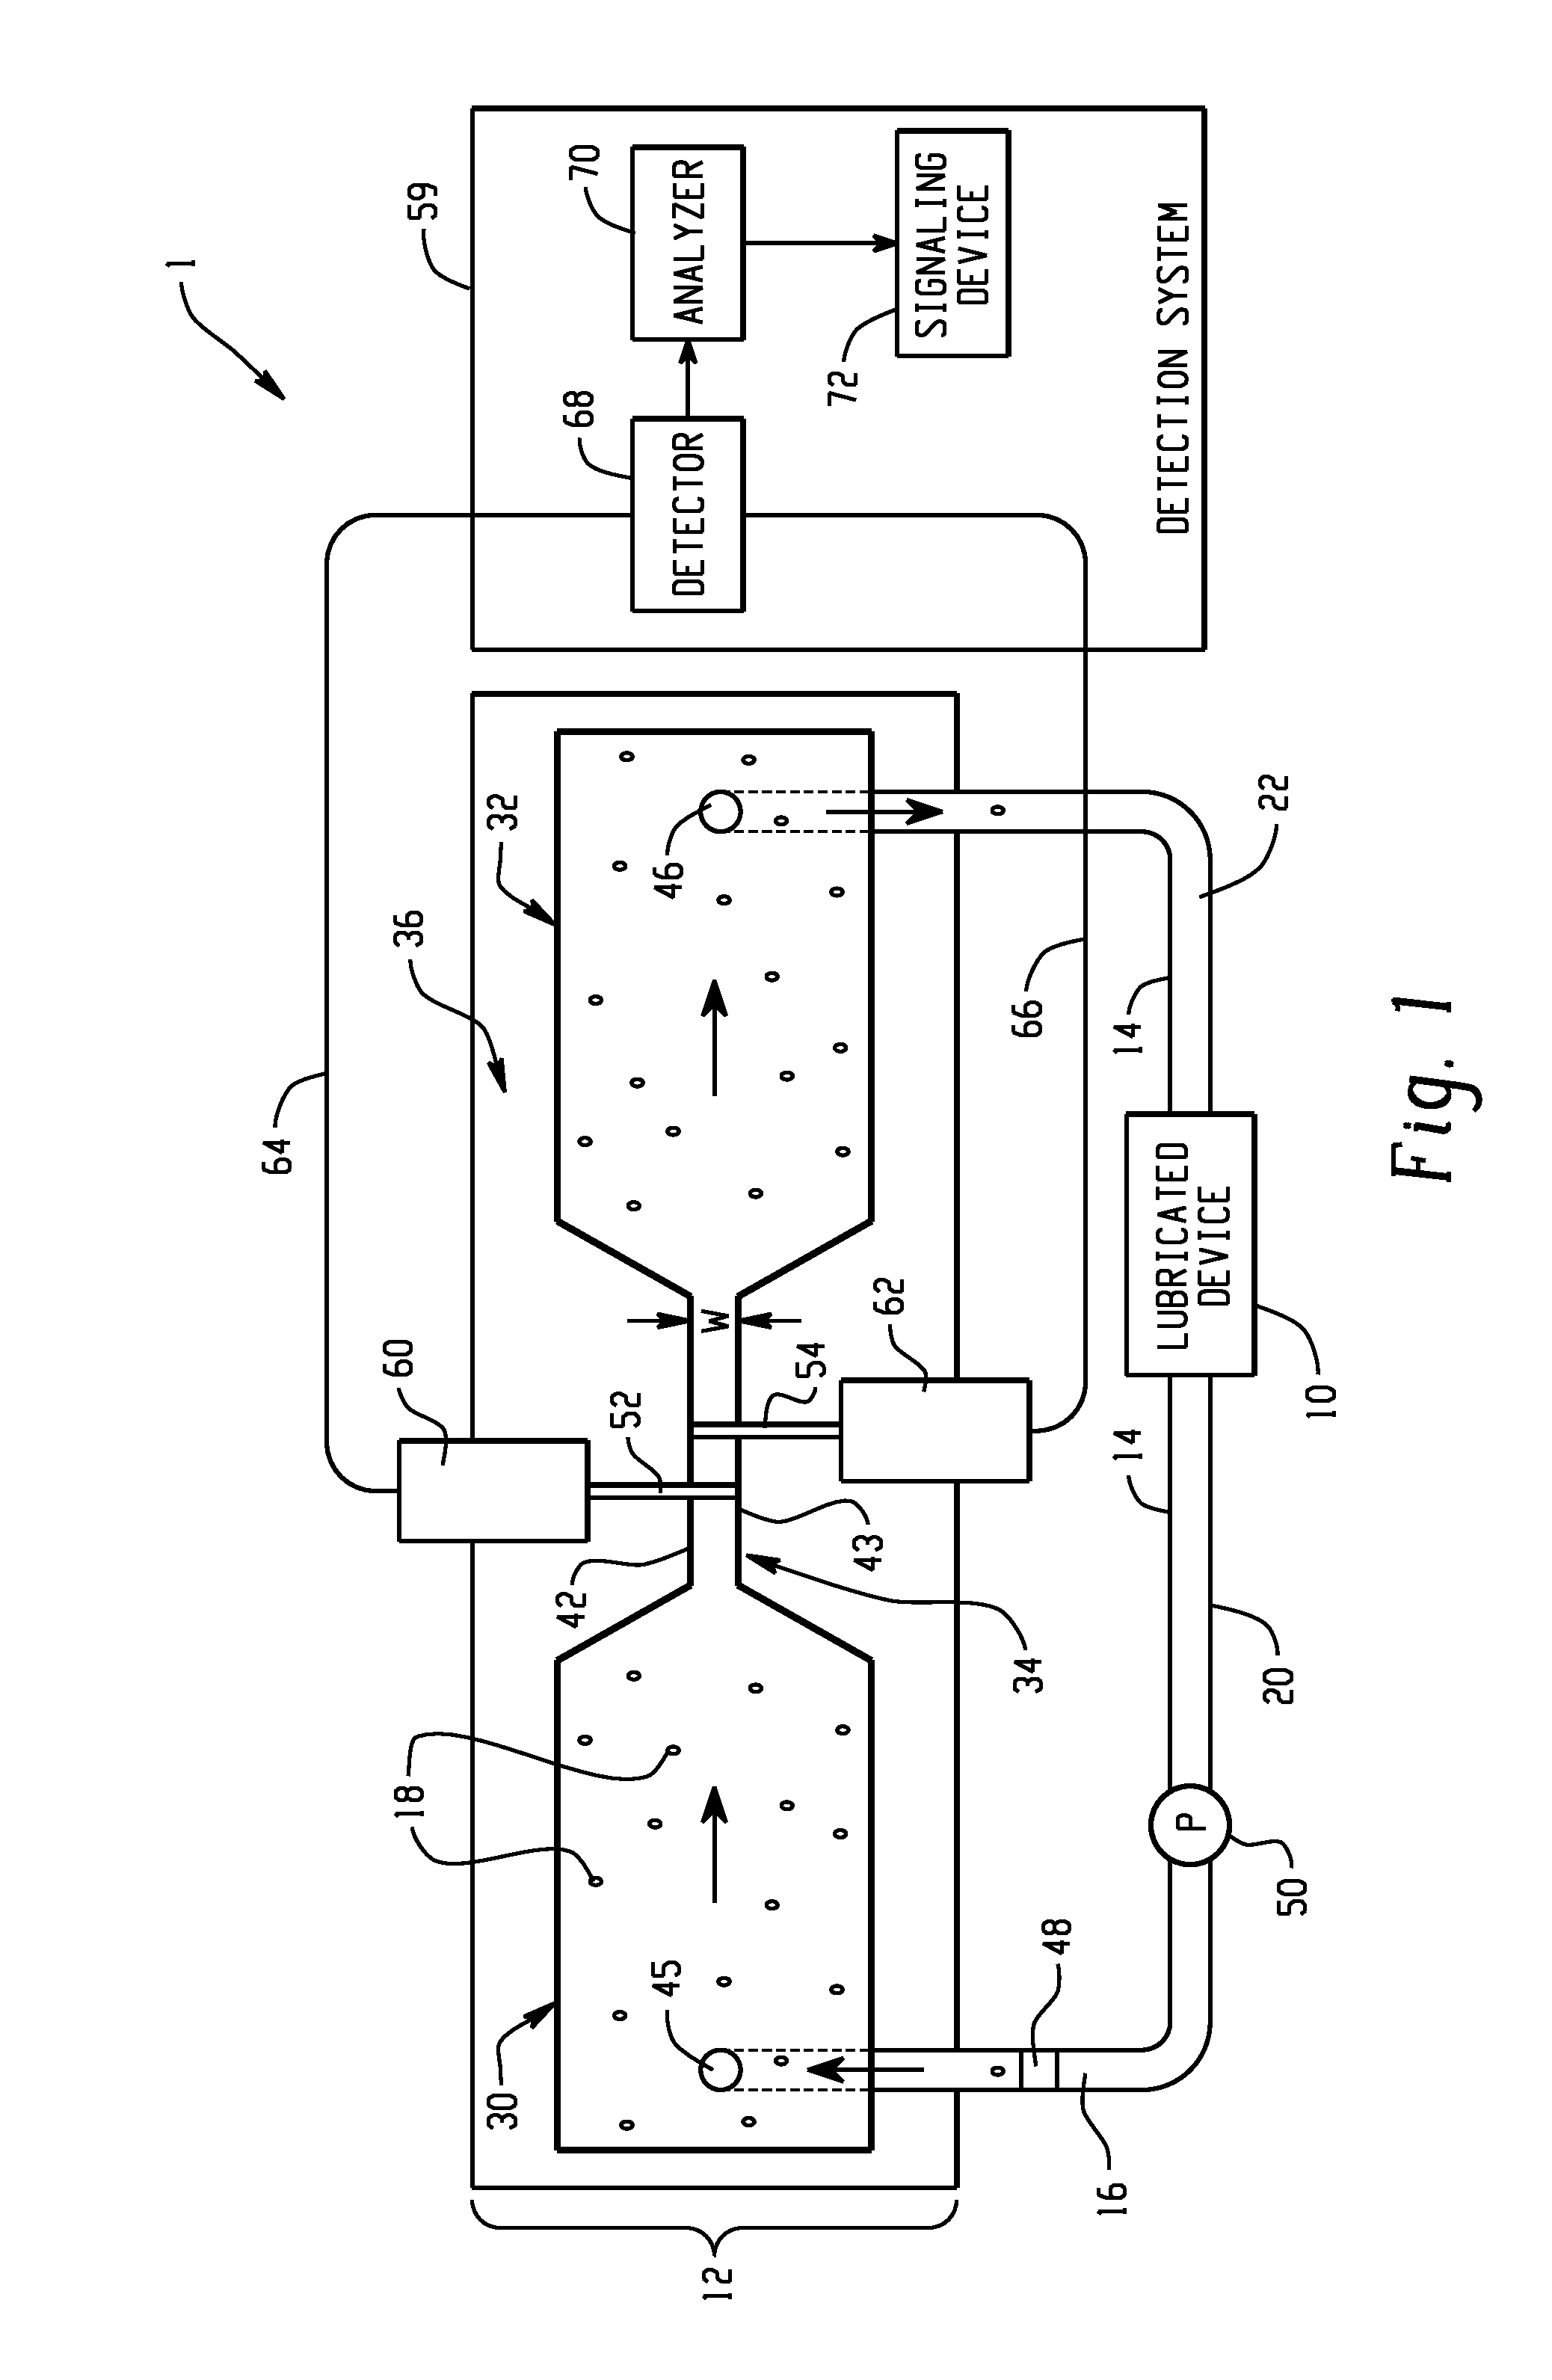 Metal wear detection apparatus and method employing microfluidic electronic device